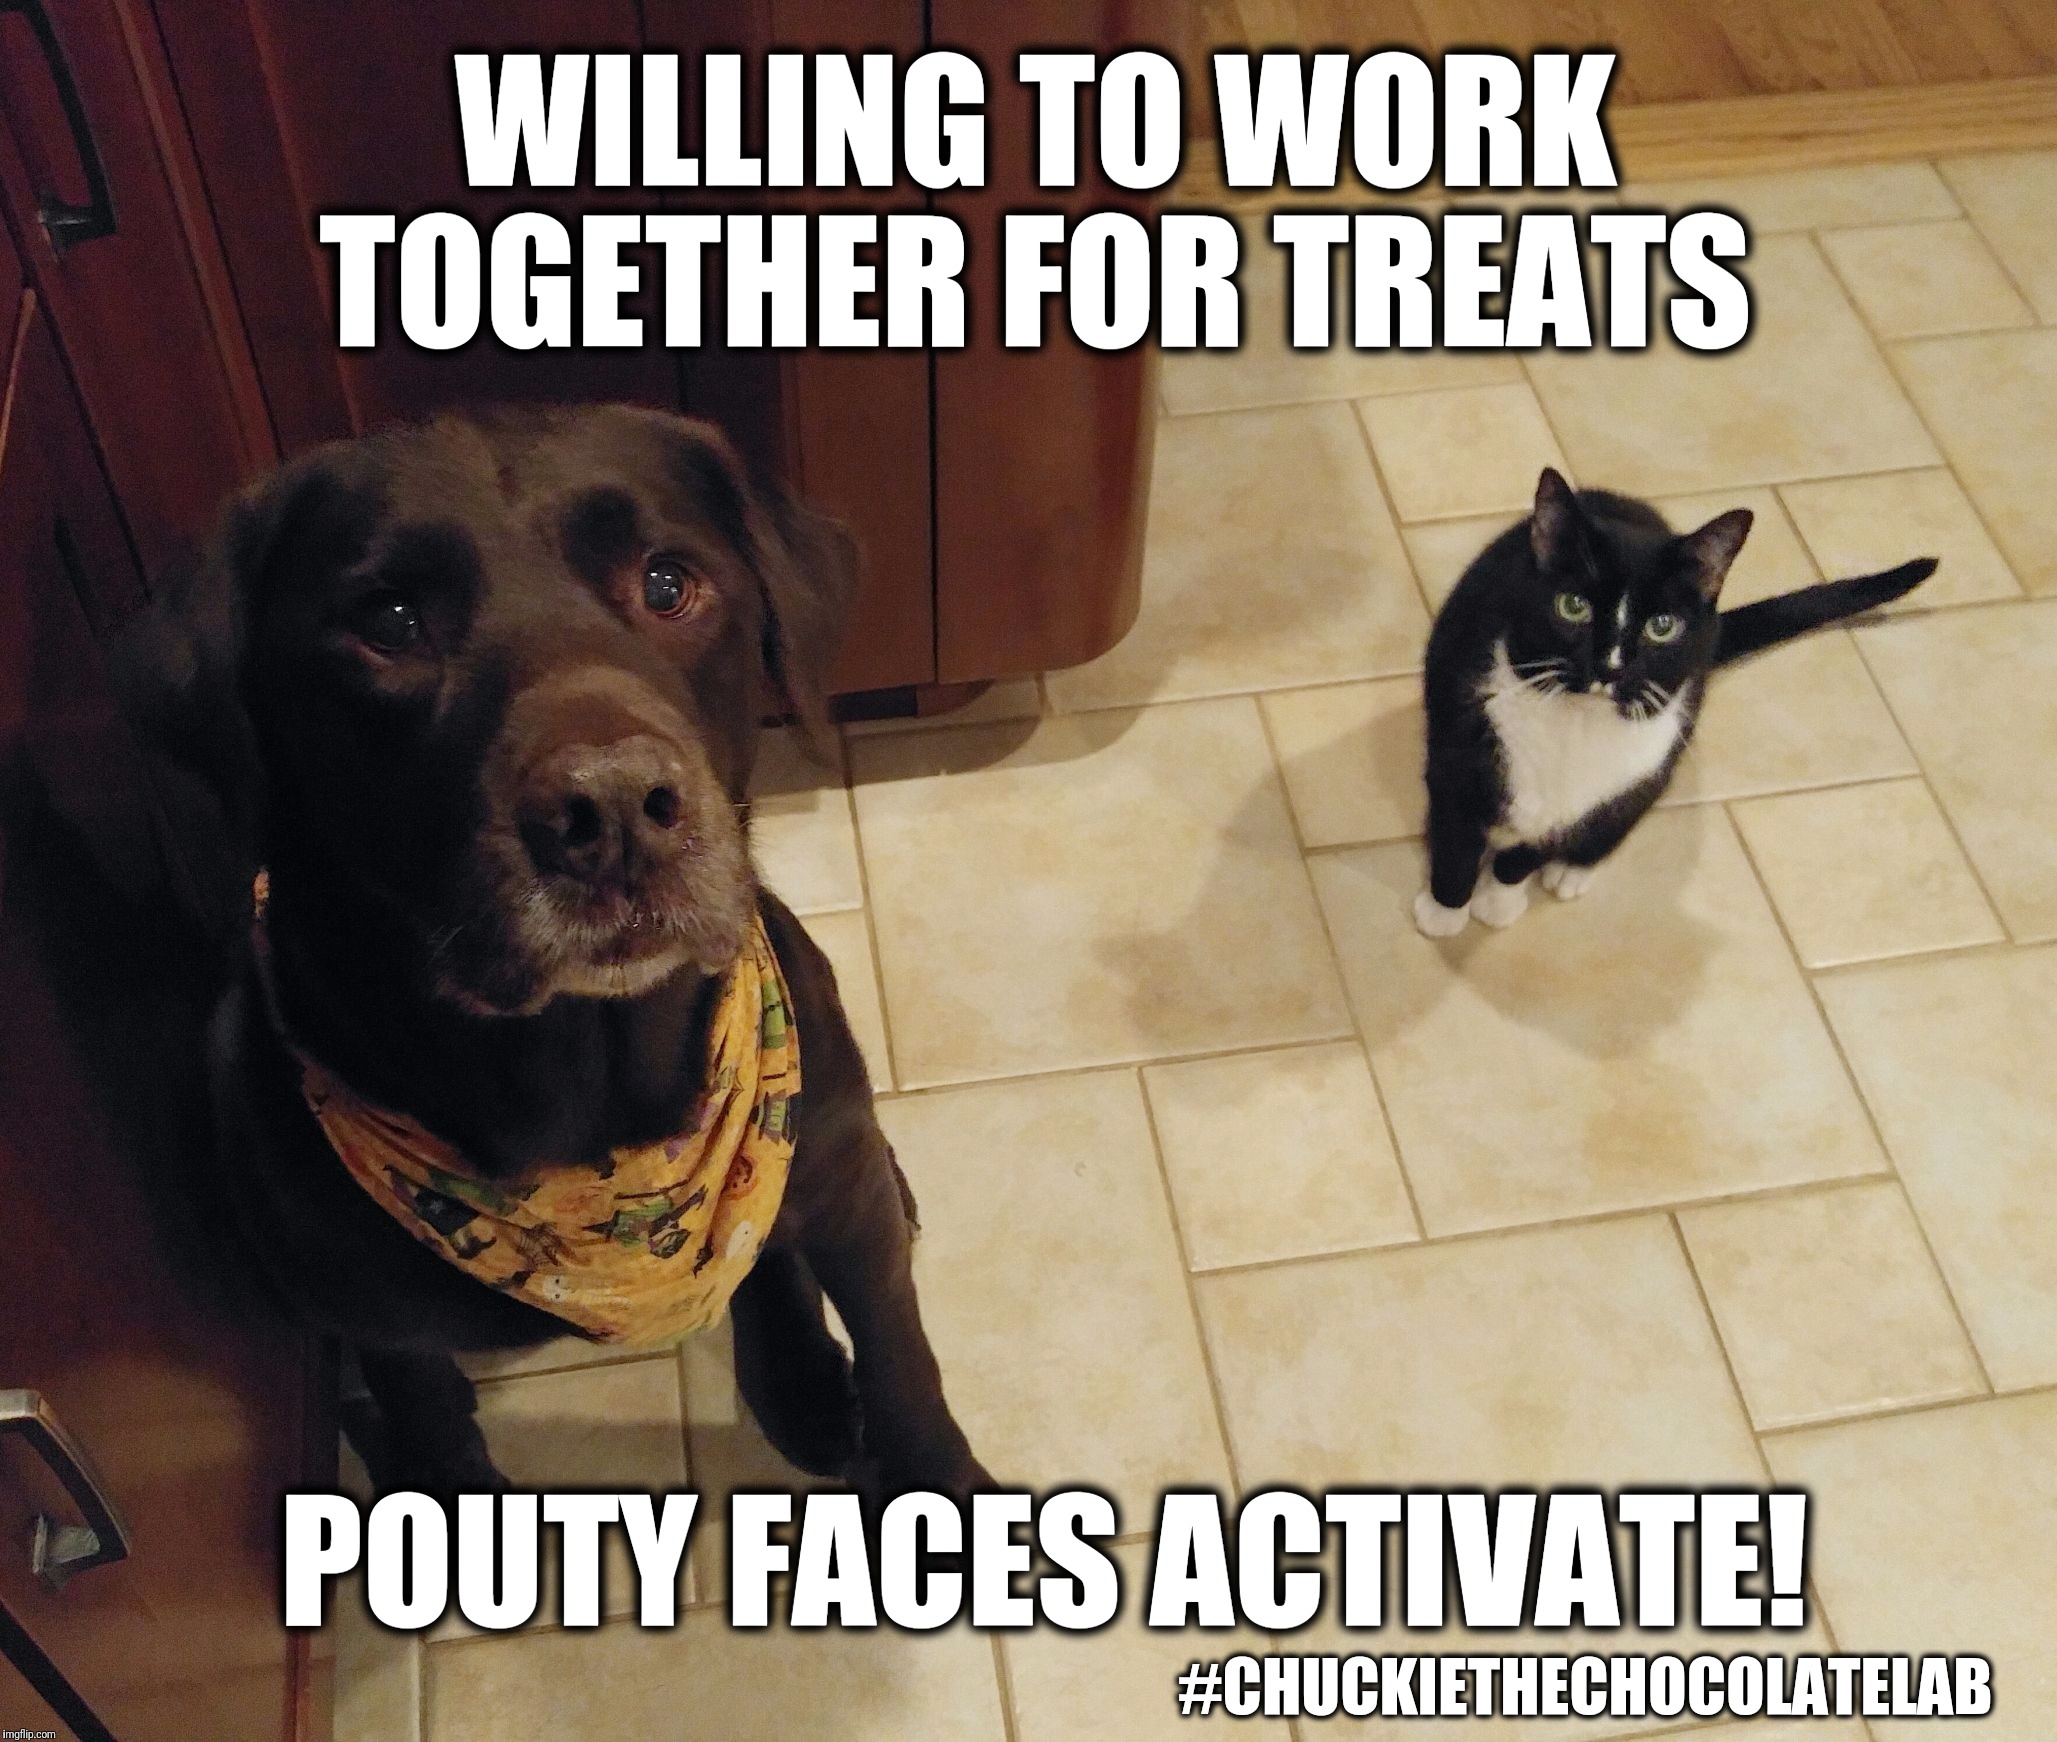 Working together for treats  | WILLING TO WORK TOGETHER FOR TREATS; POUTY FACES ACTIVATE! #CHUCKIETHECHOCOLATELAB | image tagged in chuckie the chocolate lab,dogs and cats,pouty face,funny,cute animals,memes | made w/ Imgflip meme maker